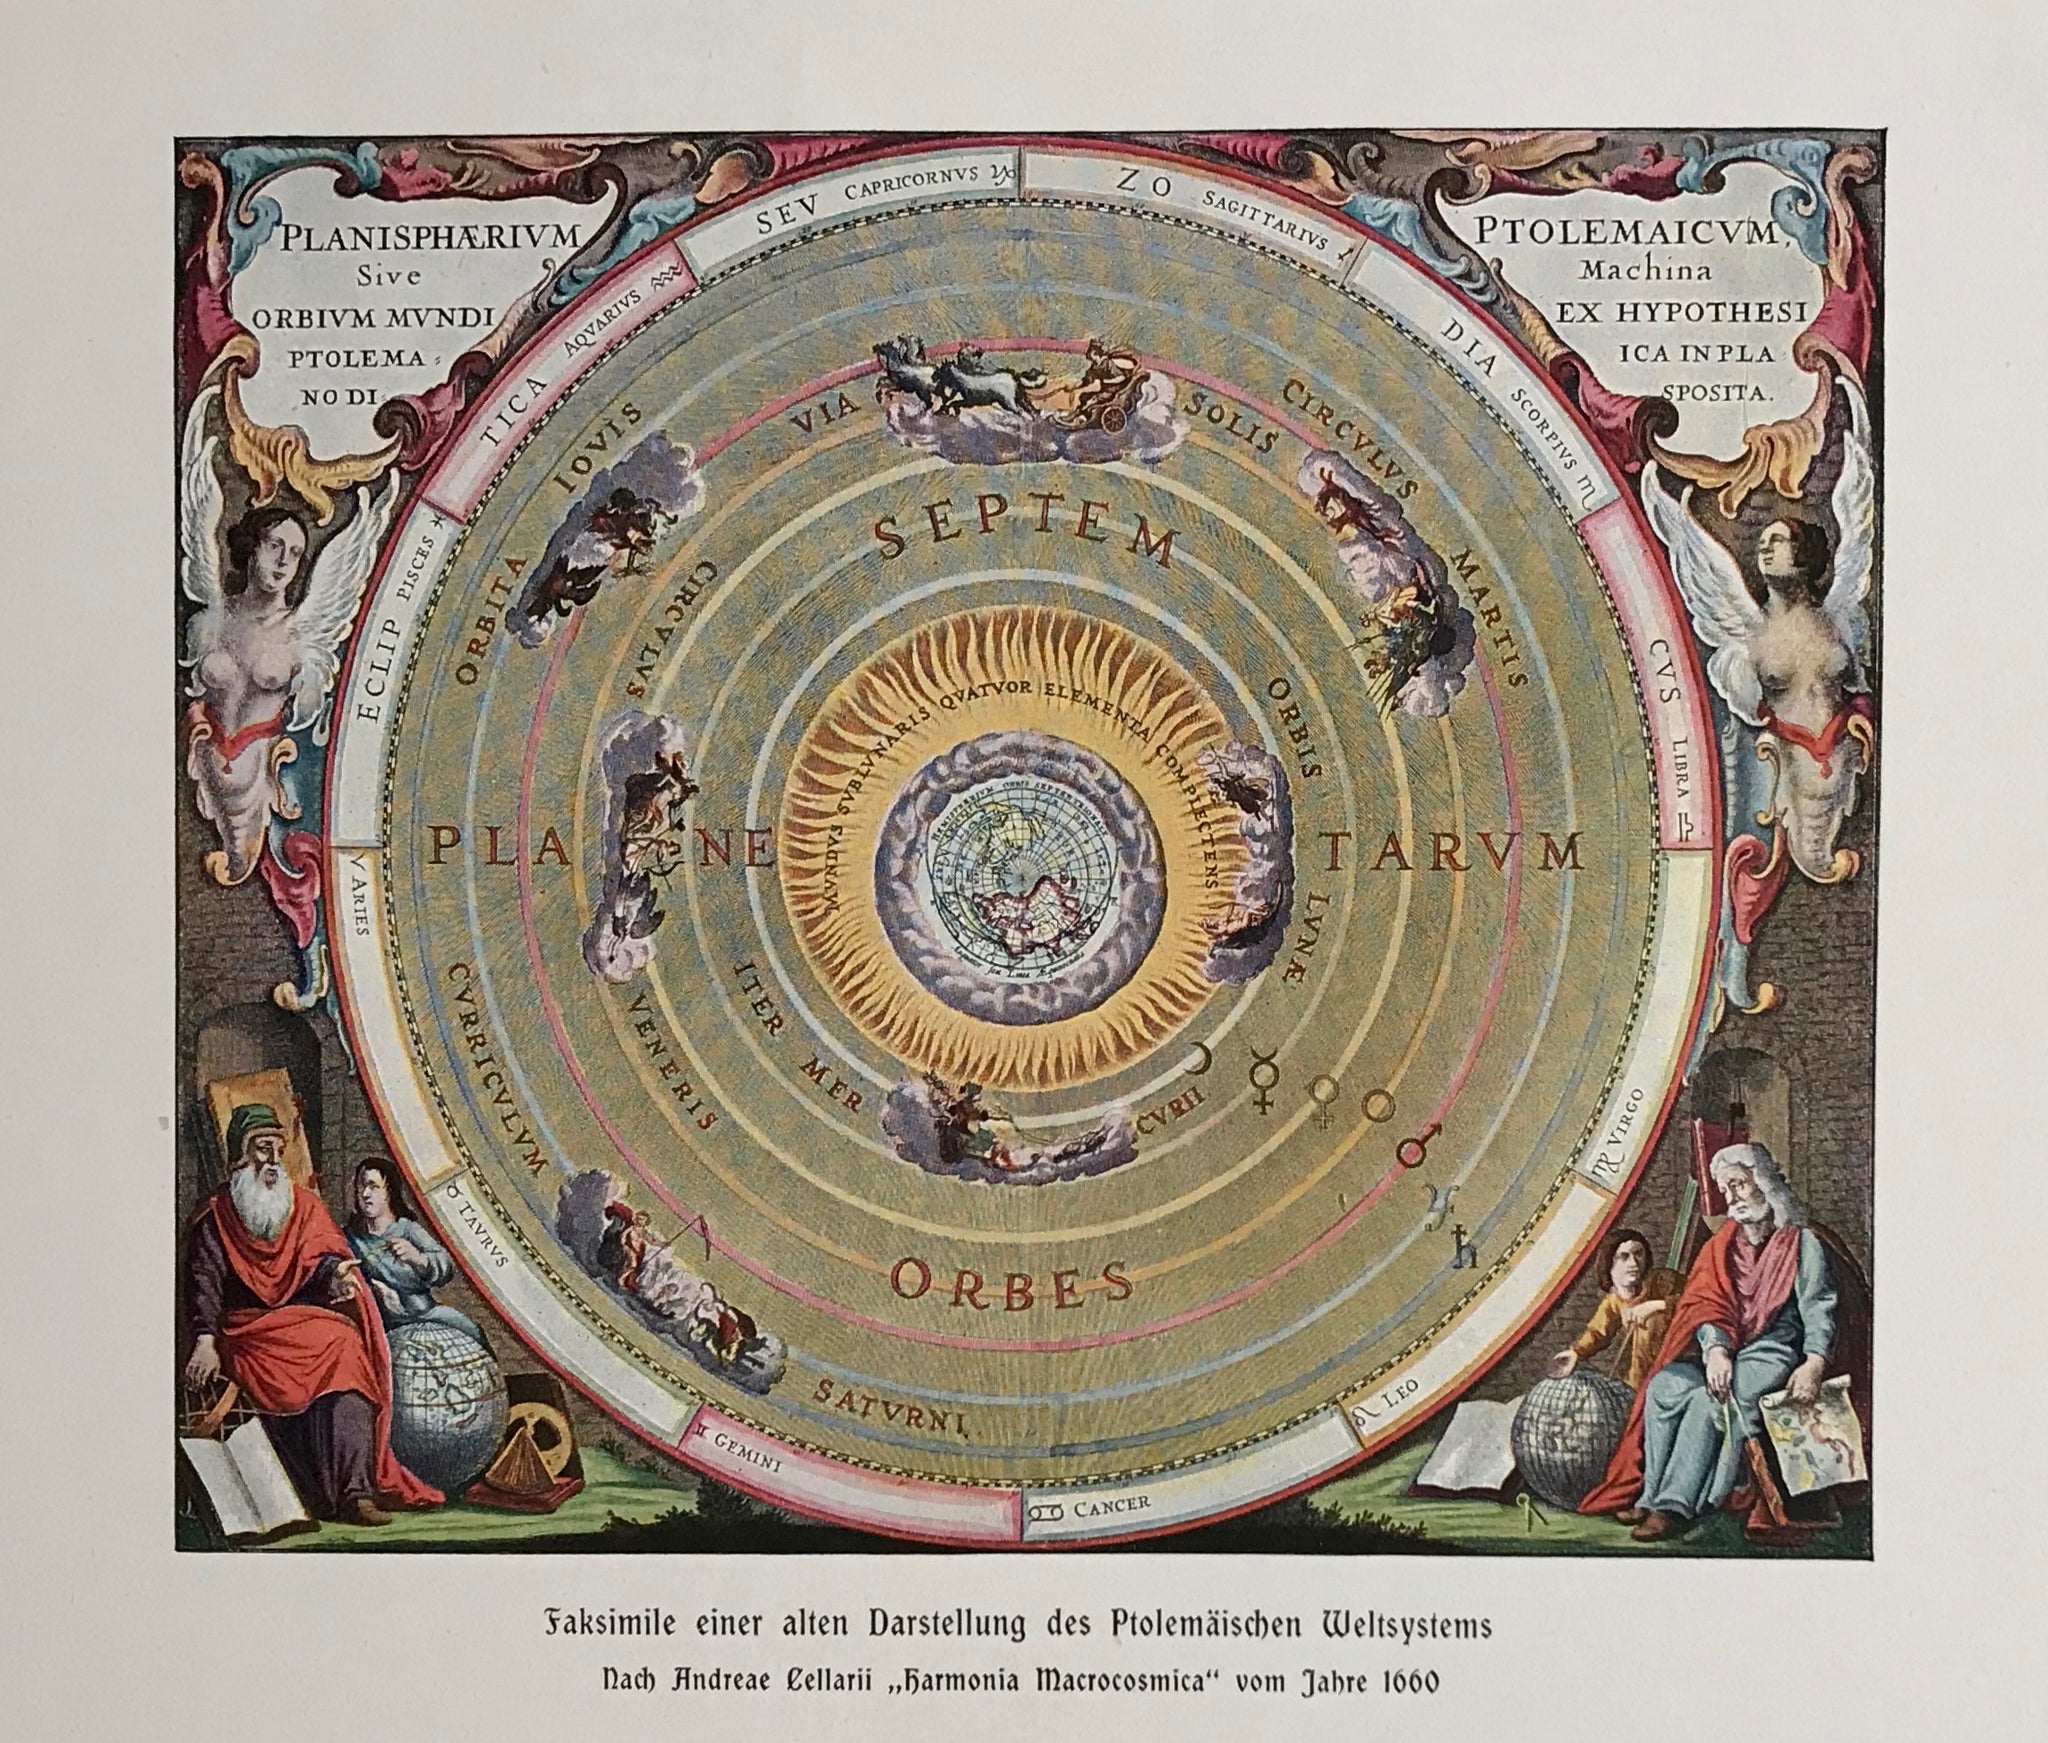 "Faksimilie einer alten Darstellung des Ptolemaeischen Weltsystems"  Wood engraving printed in color after the original by Andreae Cellarii. Published 1900. Attached to the map is a transparent layover with the names of the star formations.